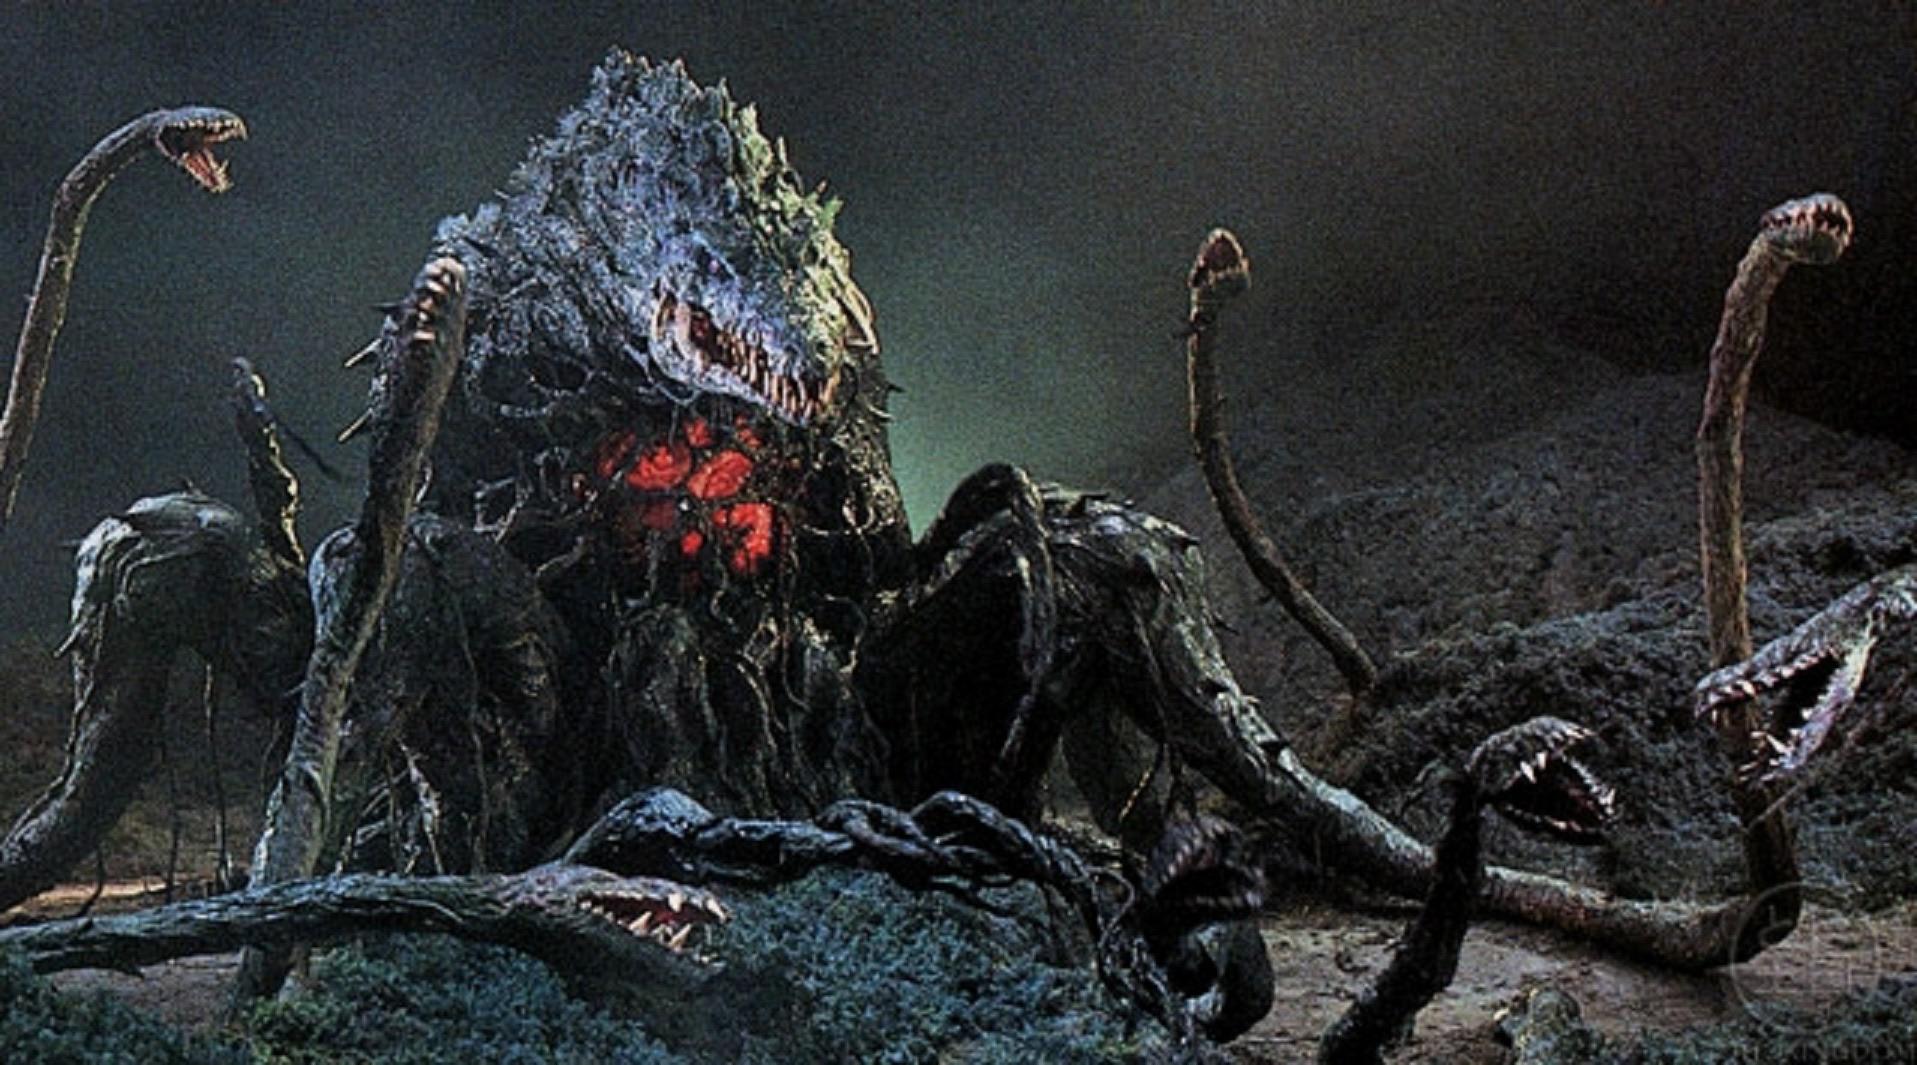 Would you want to see Biollante in the Monsterverse? Would you